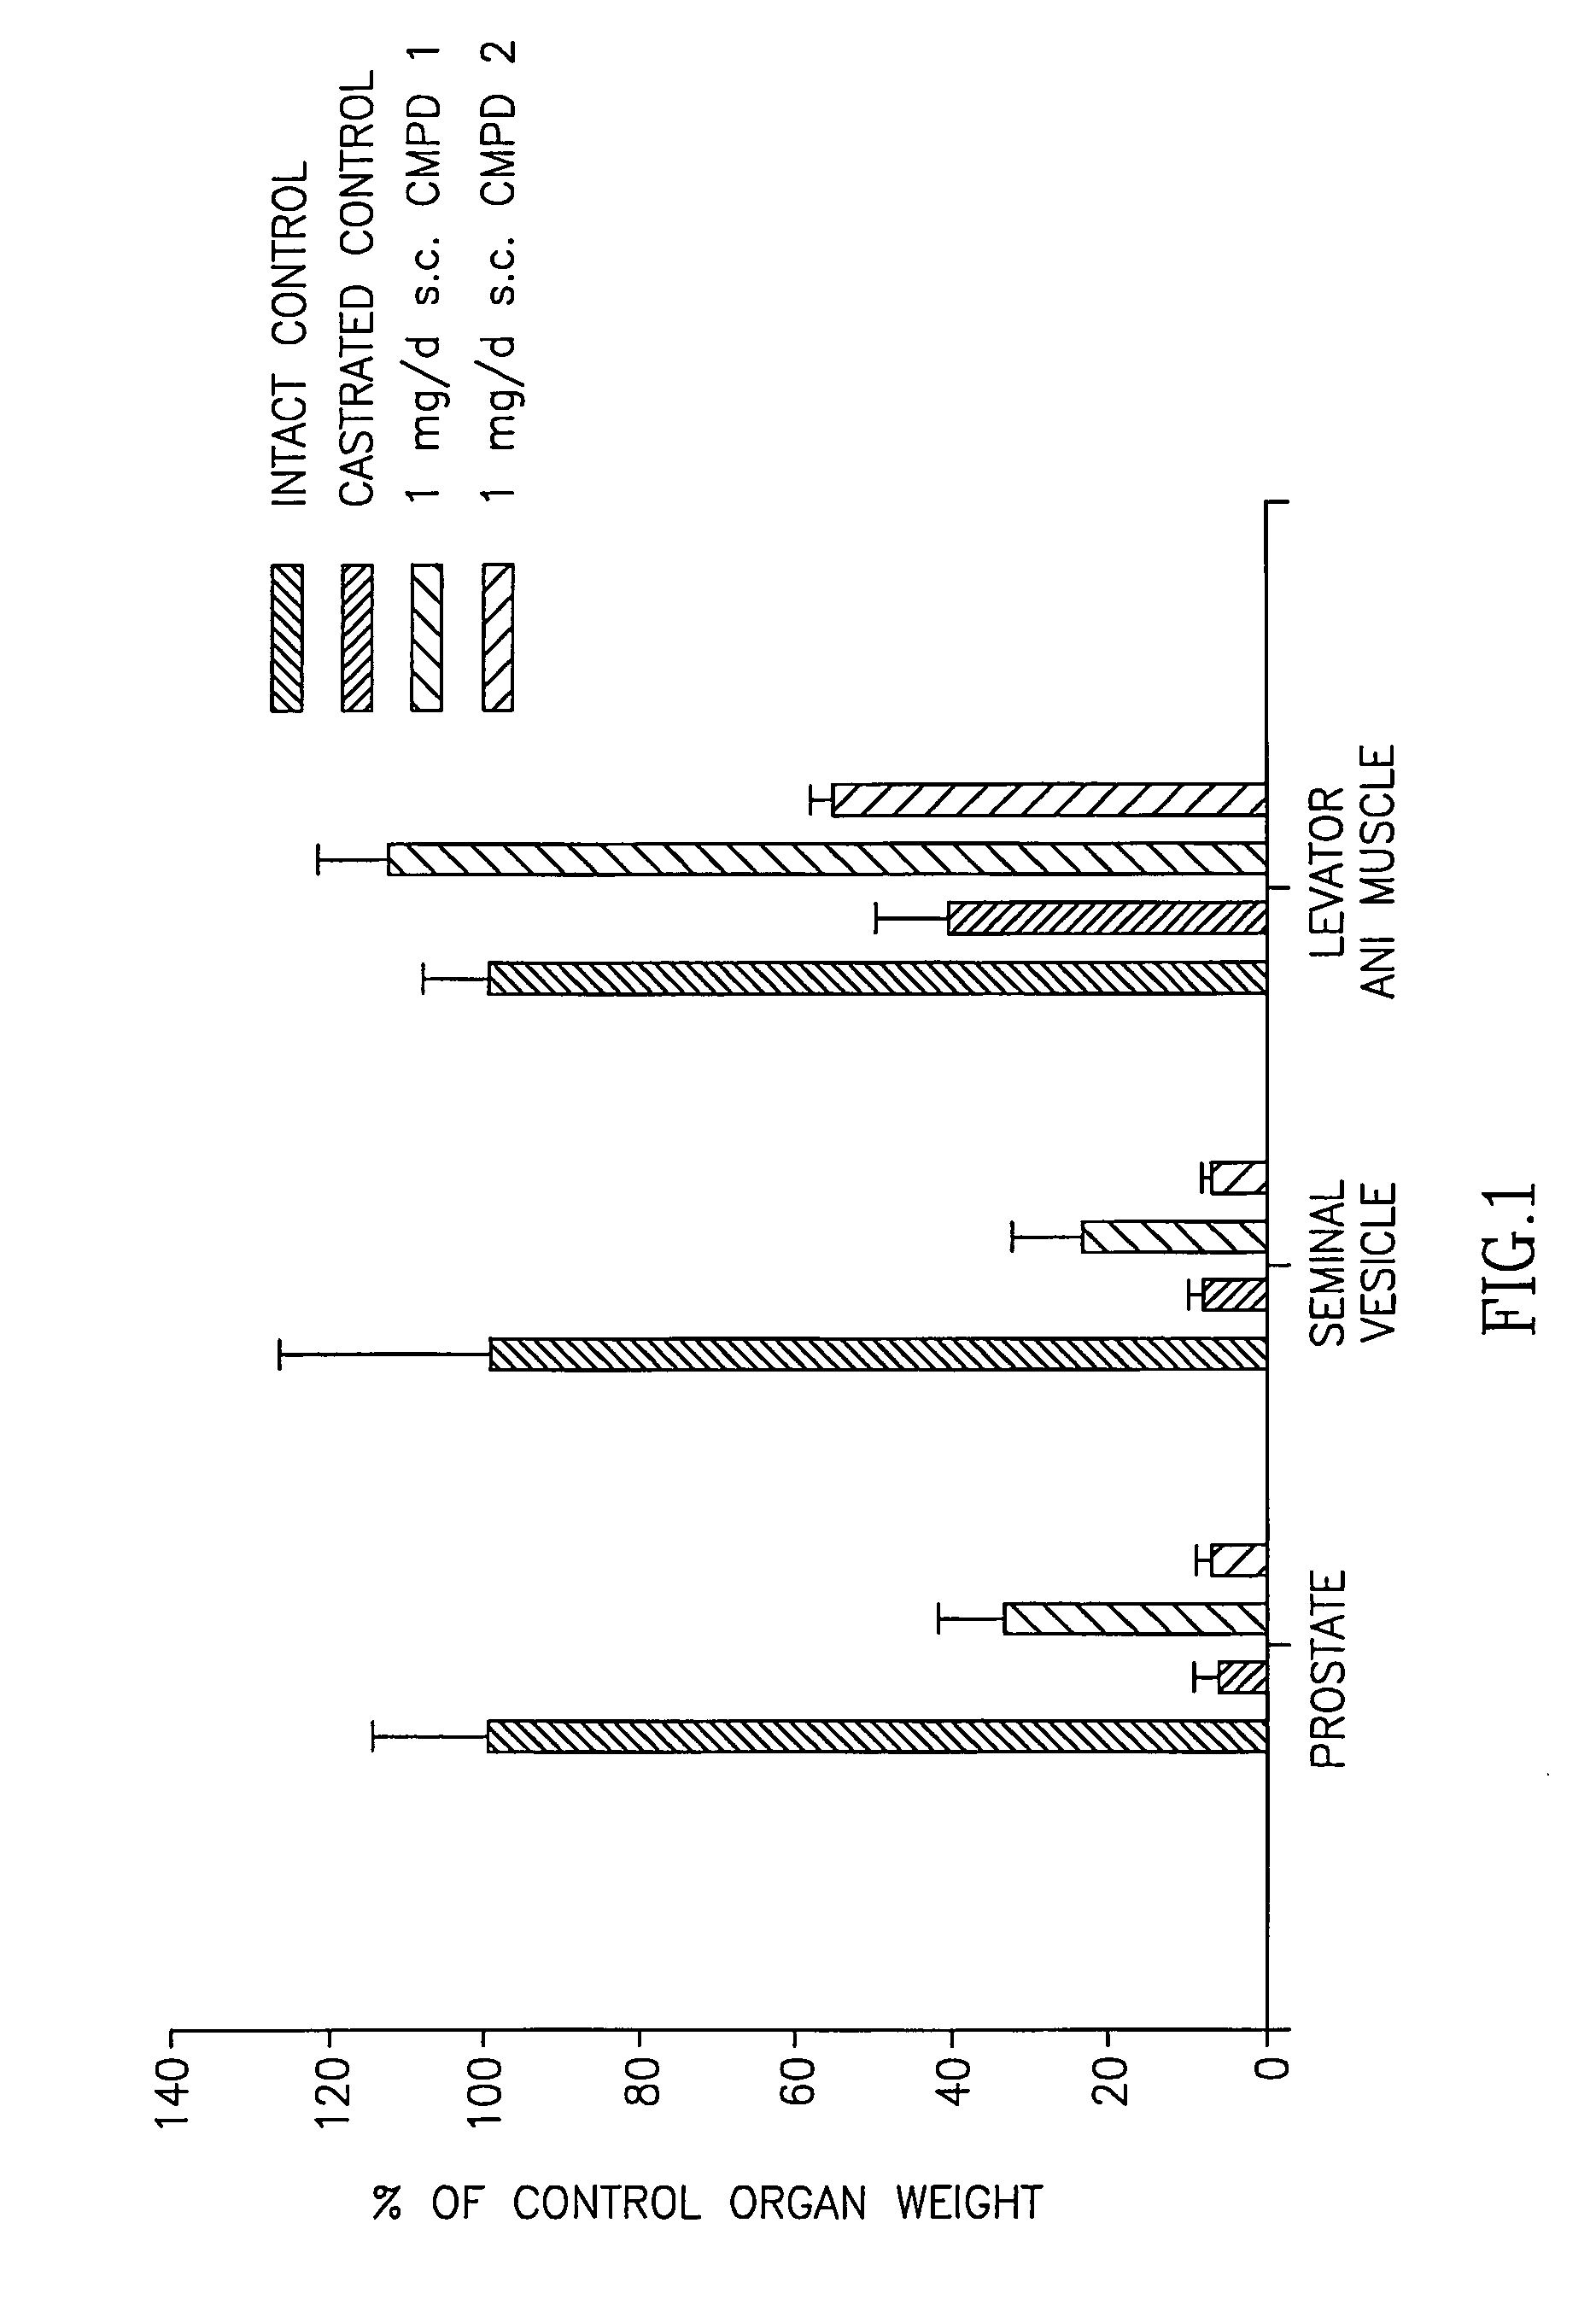 Multi-substituted selective androgen receptor modulators and methods of use thereof